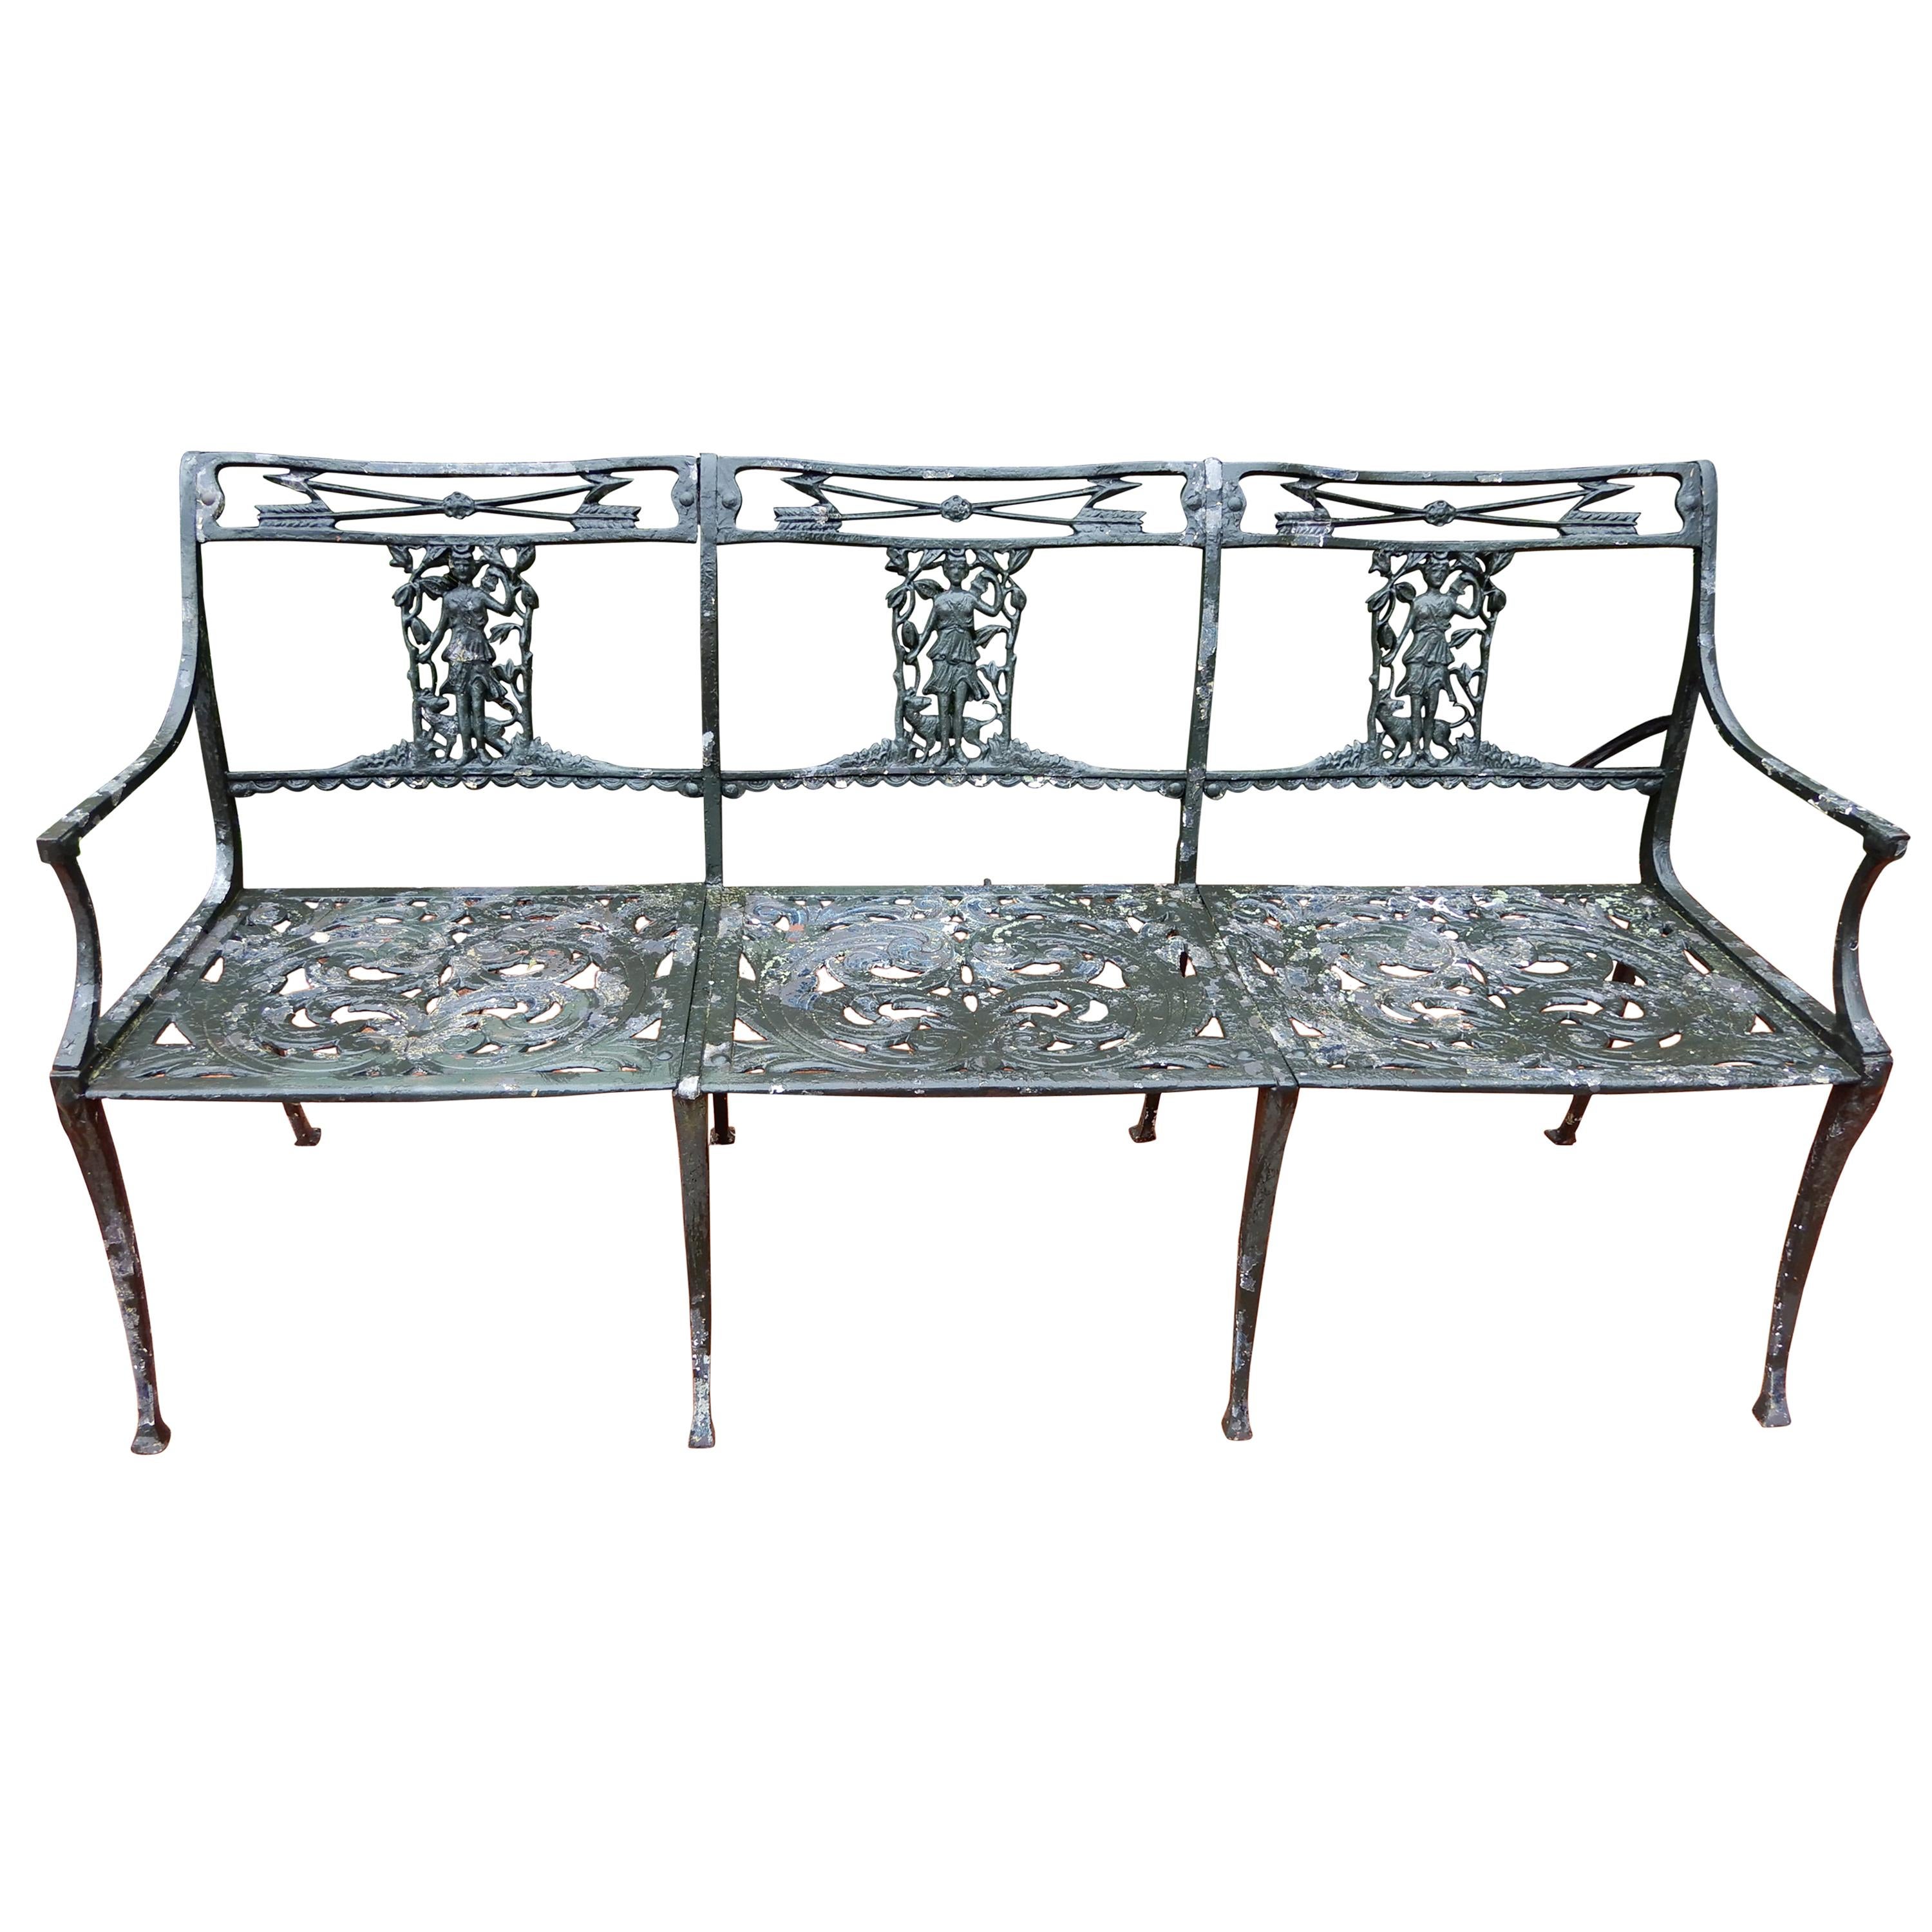 Vintage Bench by Molla of Diana the Huntress For Sale